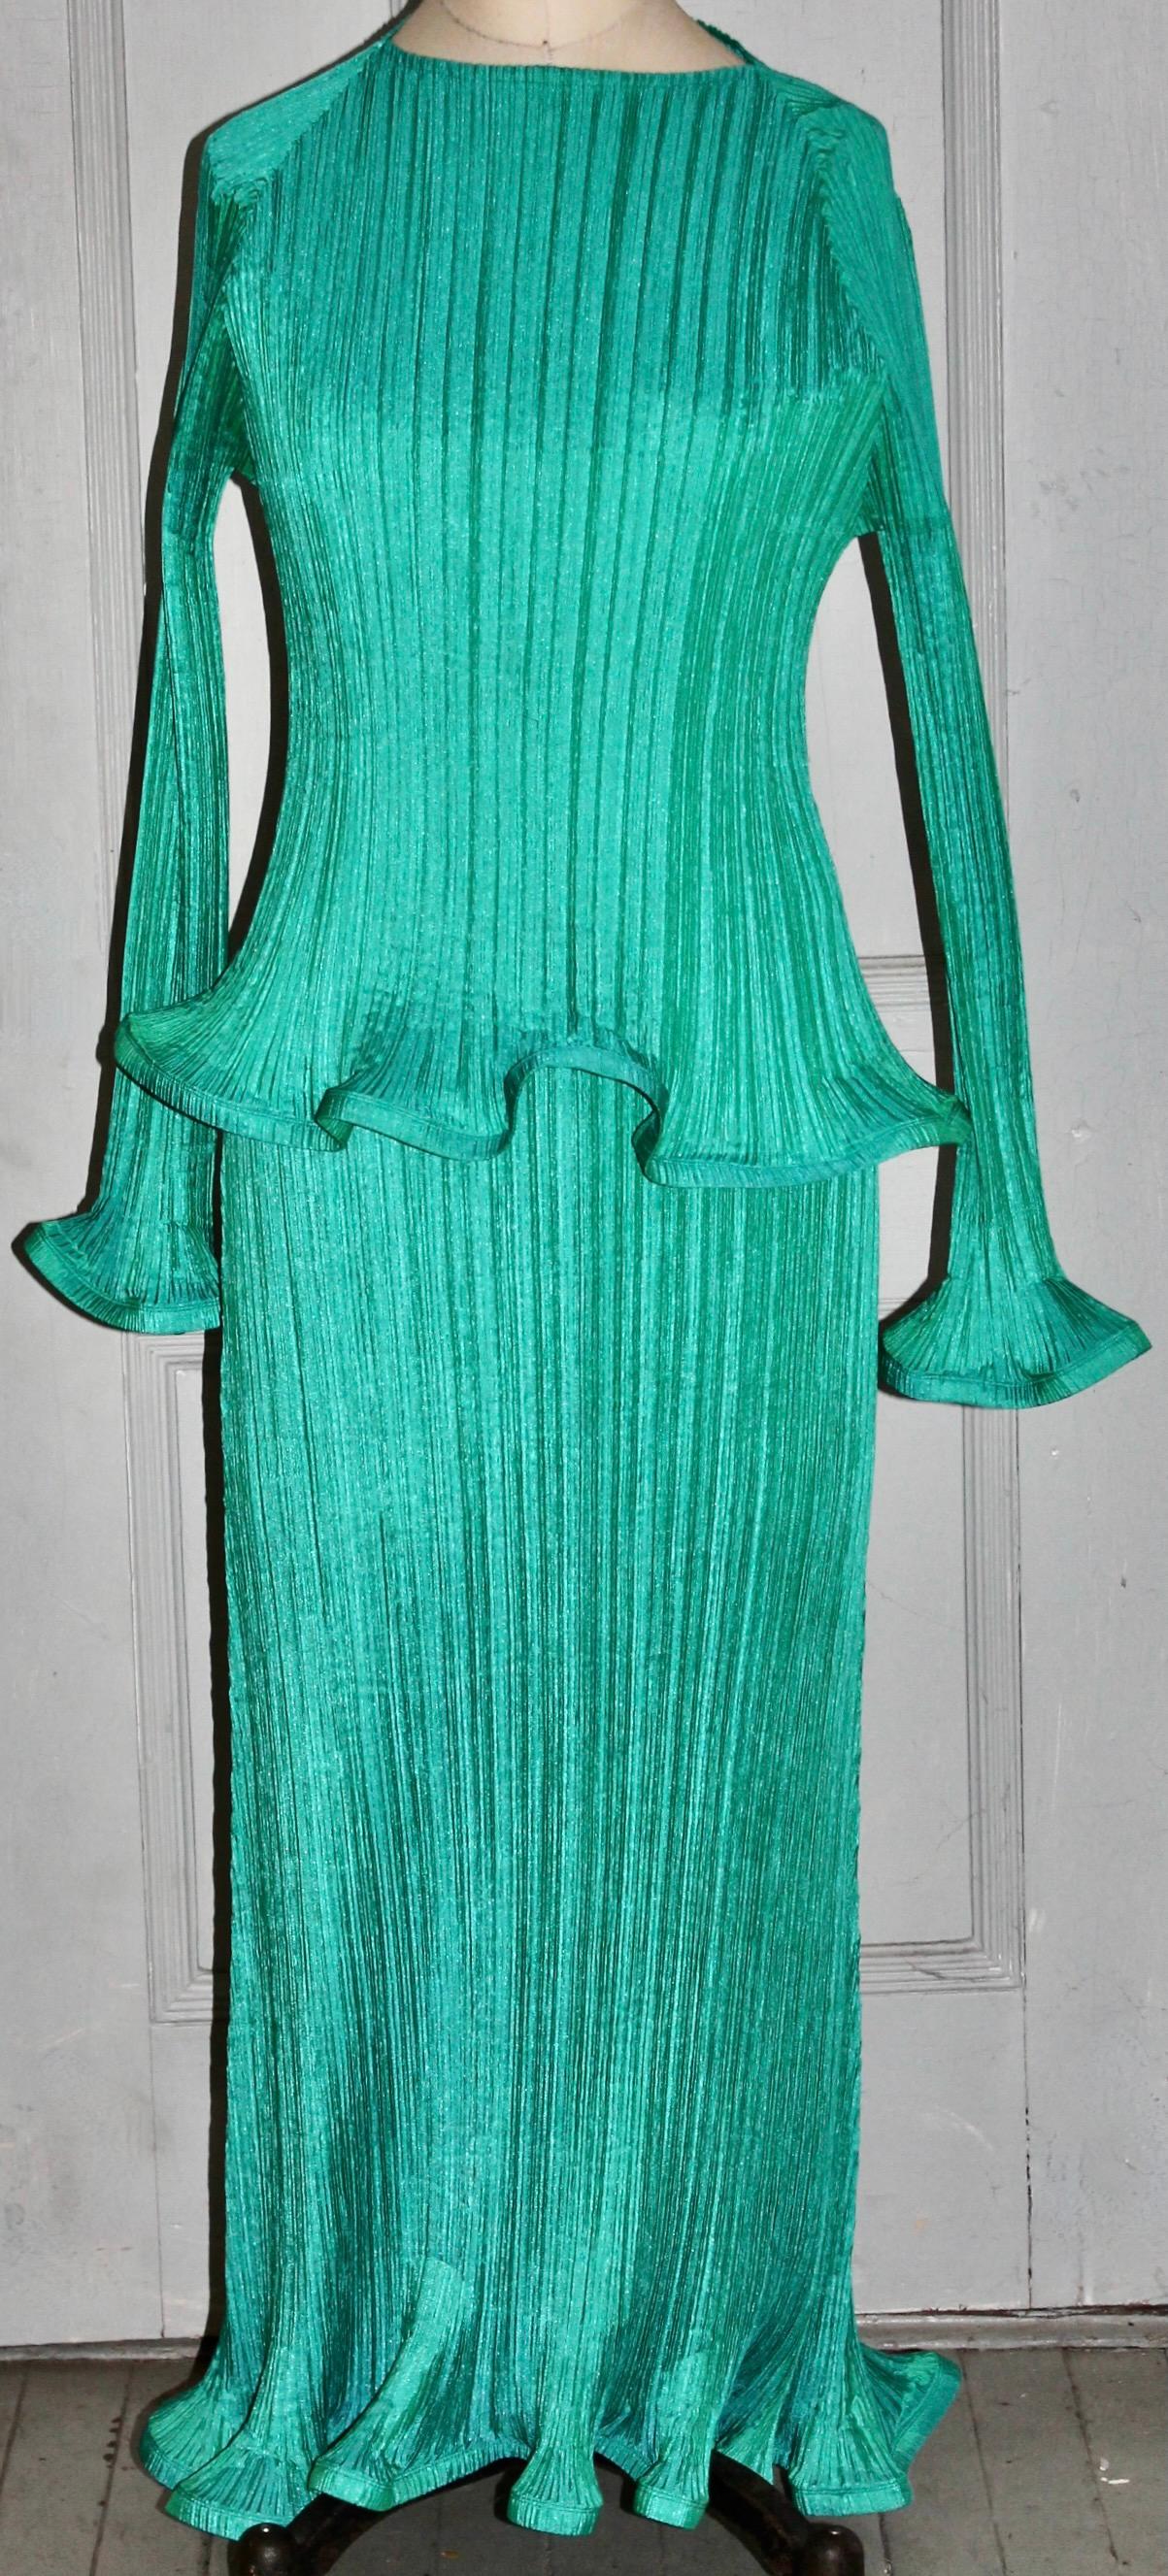 Offering a bright green pleated sculptural Issey Miyake (labeled) Polyester dress
and overtop. Overall length 52